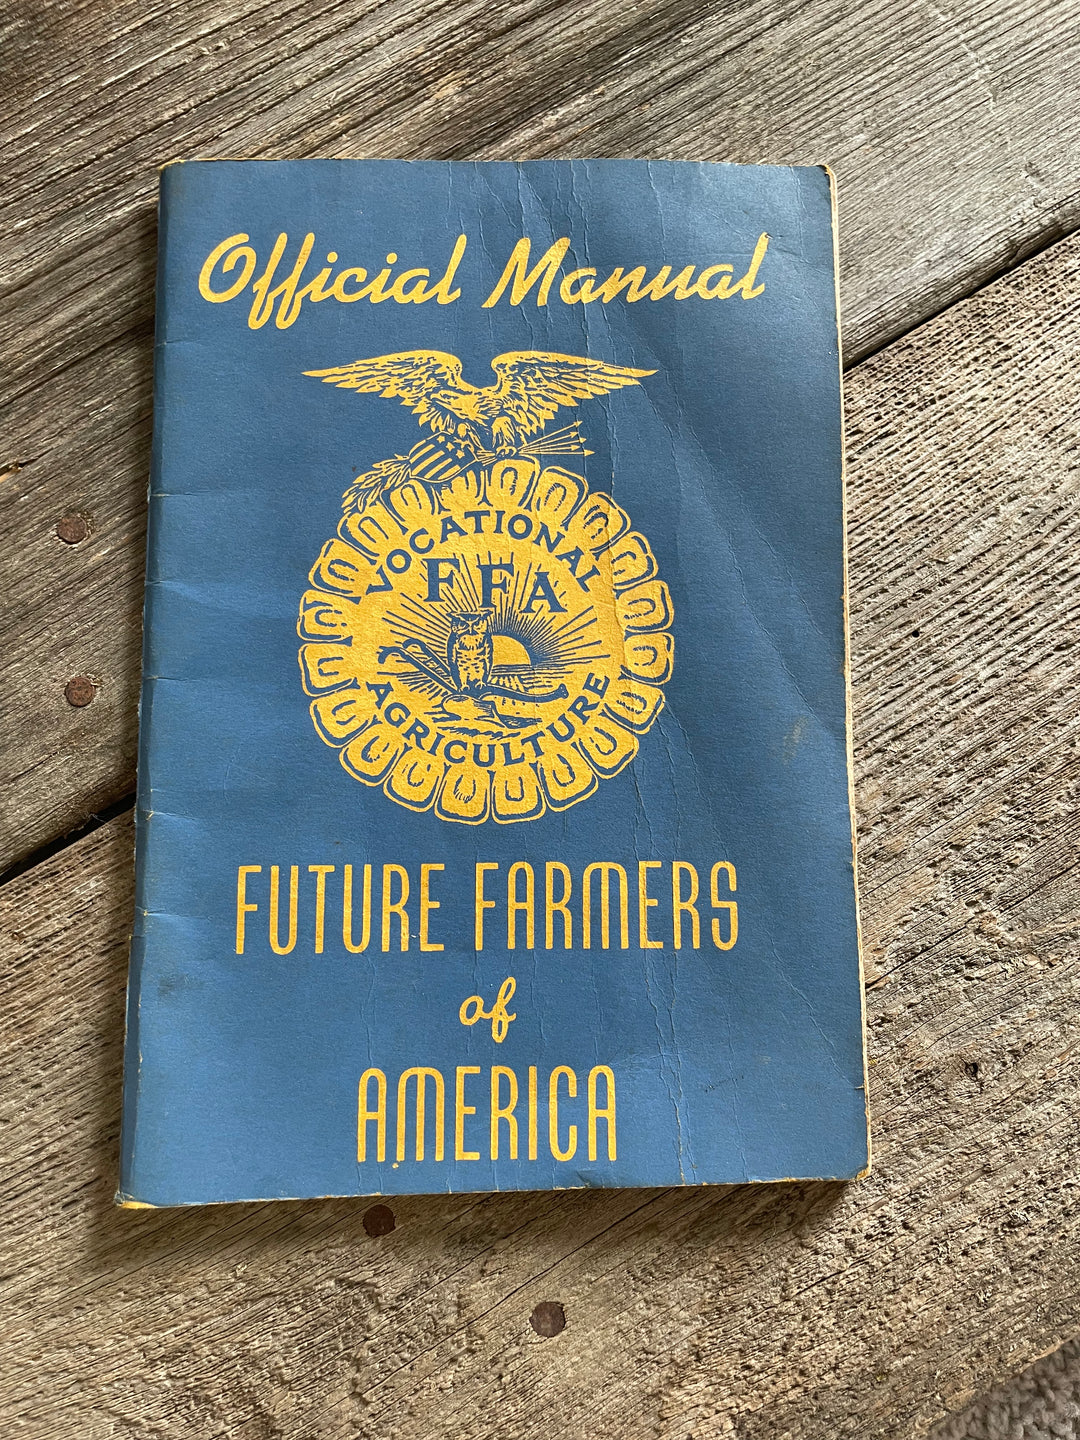 Official Manual: Futures Farmers of American, 1956